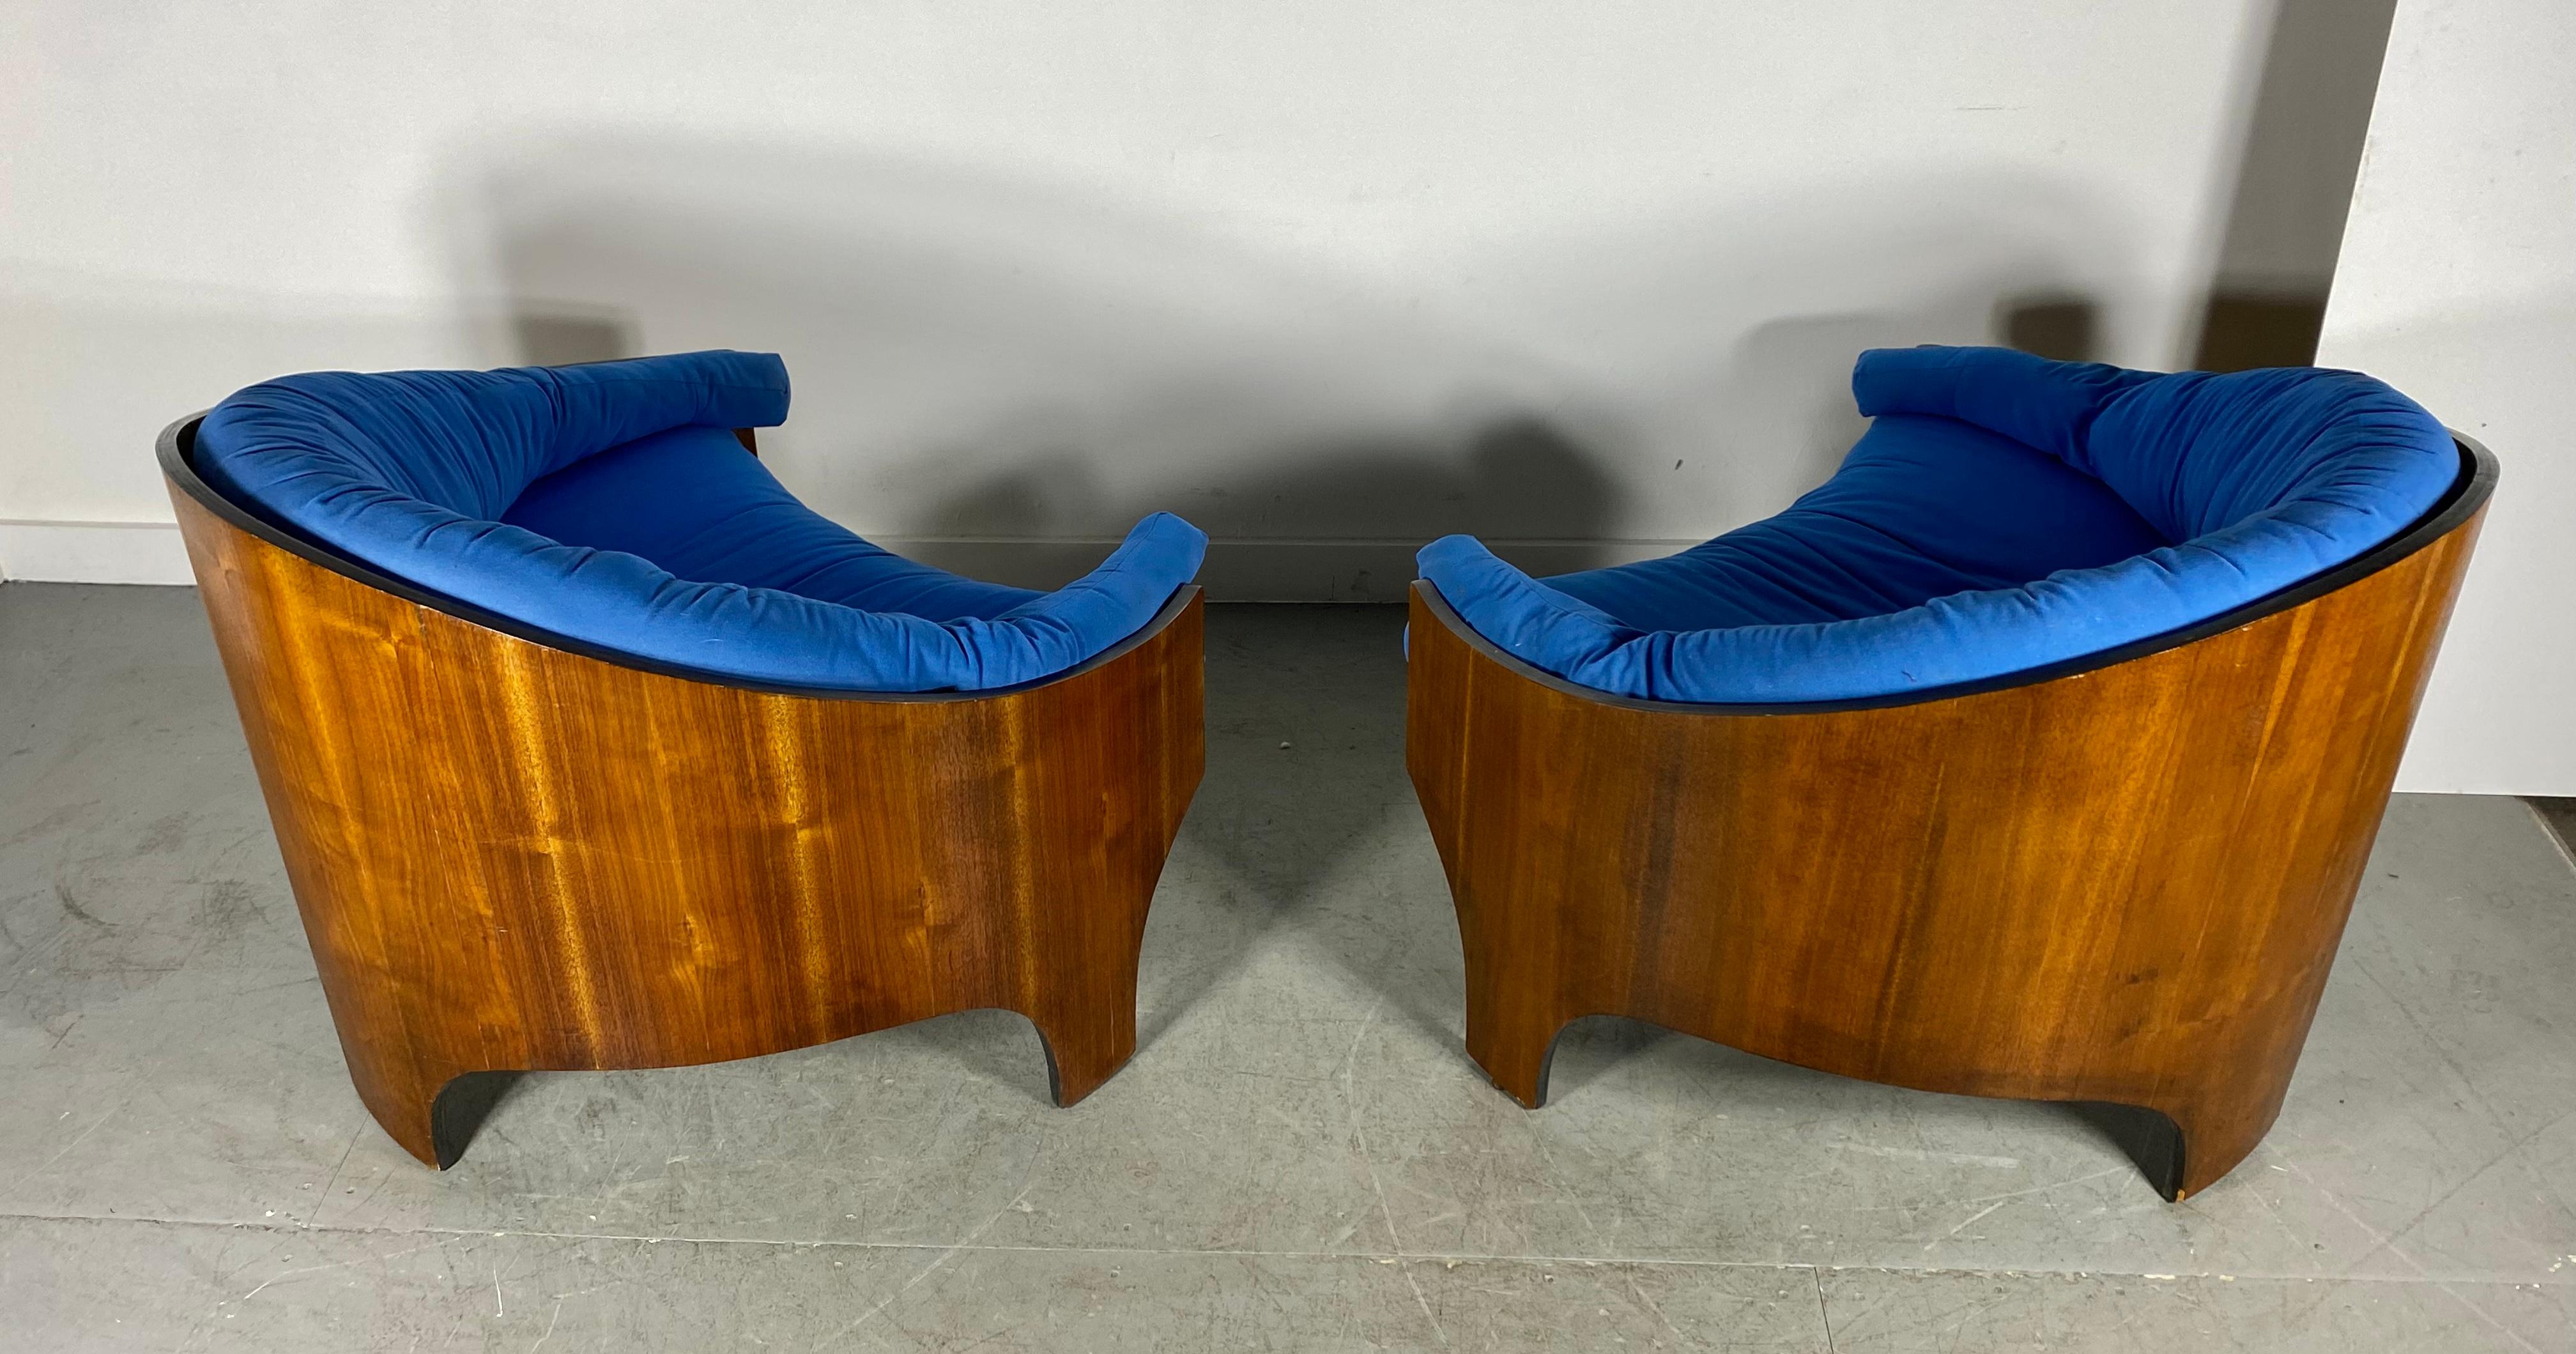 Henry Glass Intimate Island Lounge Chairs Stunning Moulded Walnut For Sale 5